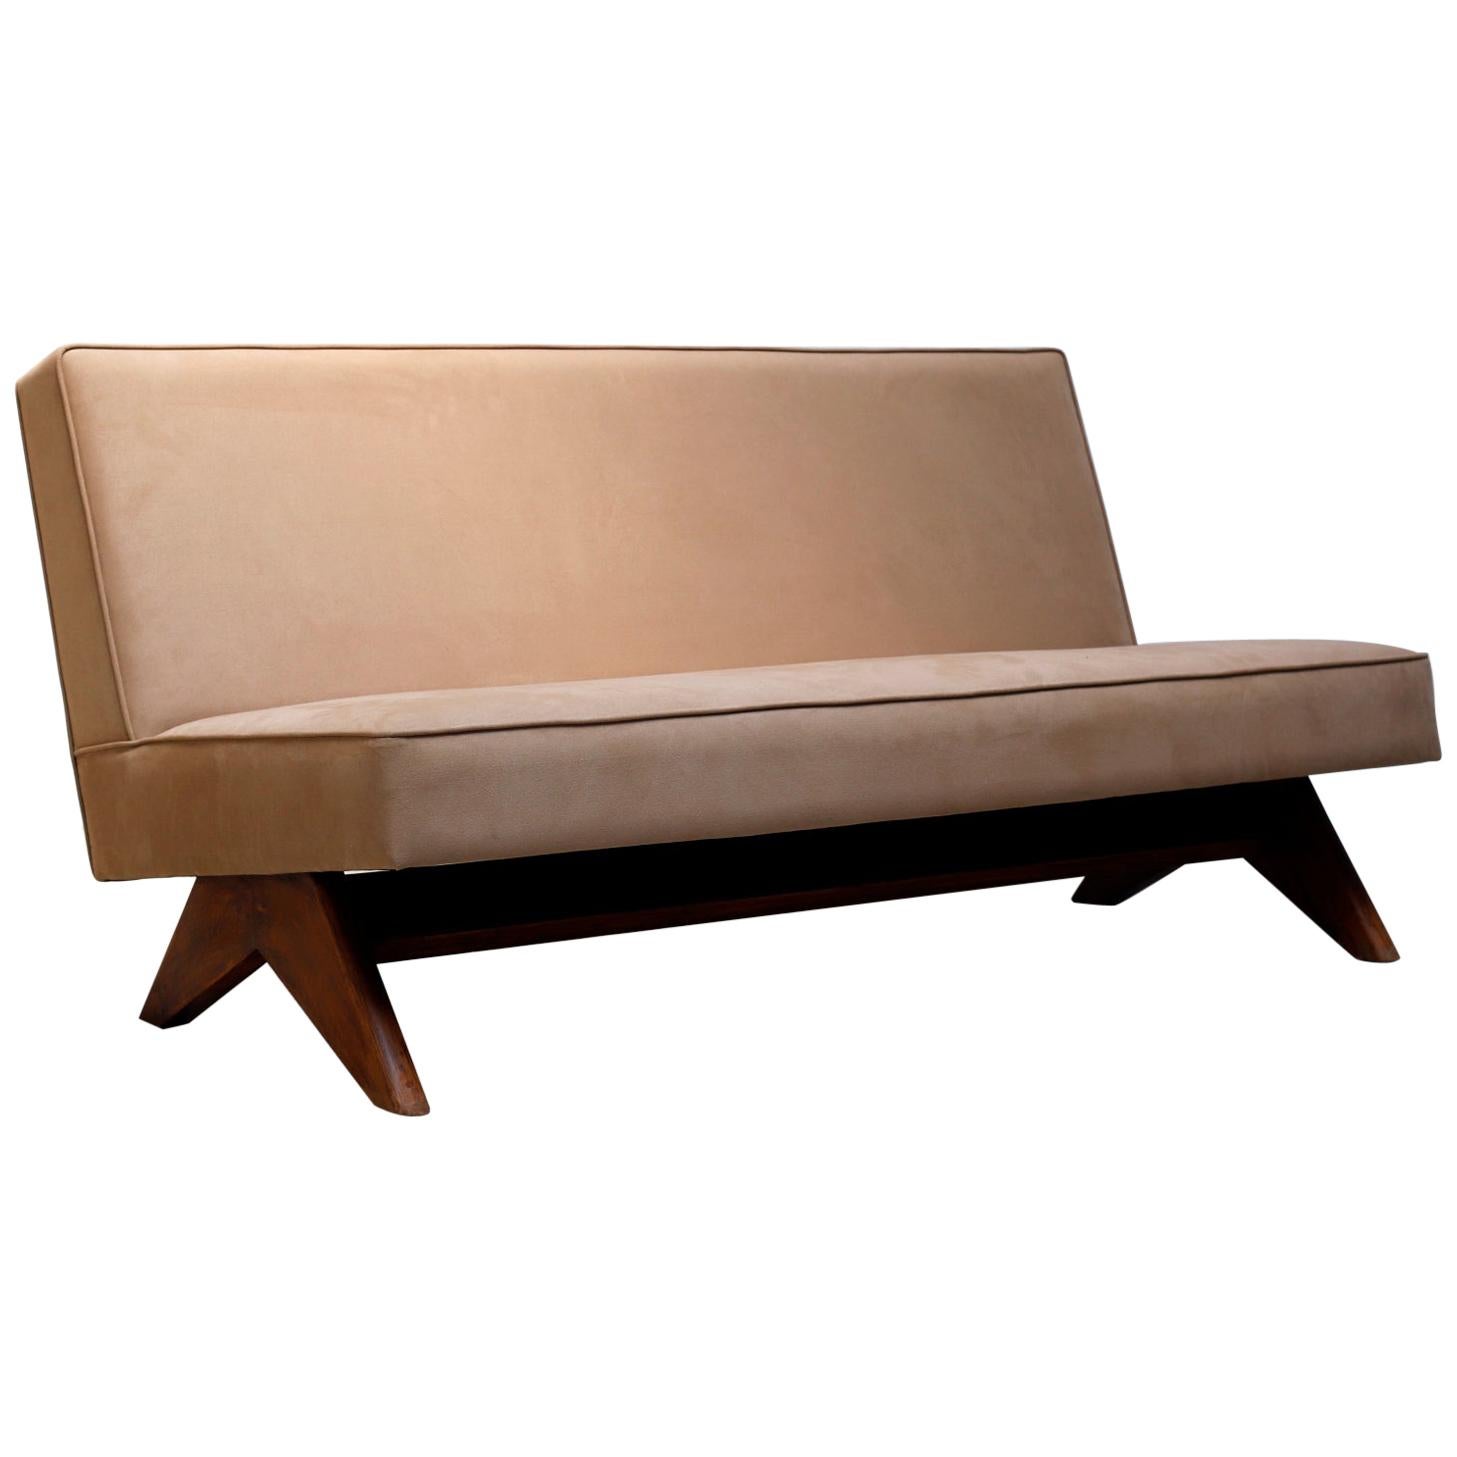 Pierre Jeanneret Sofa from Chandigarh, India